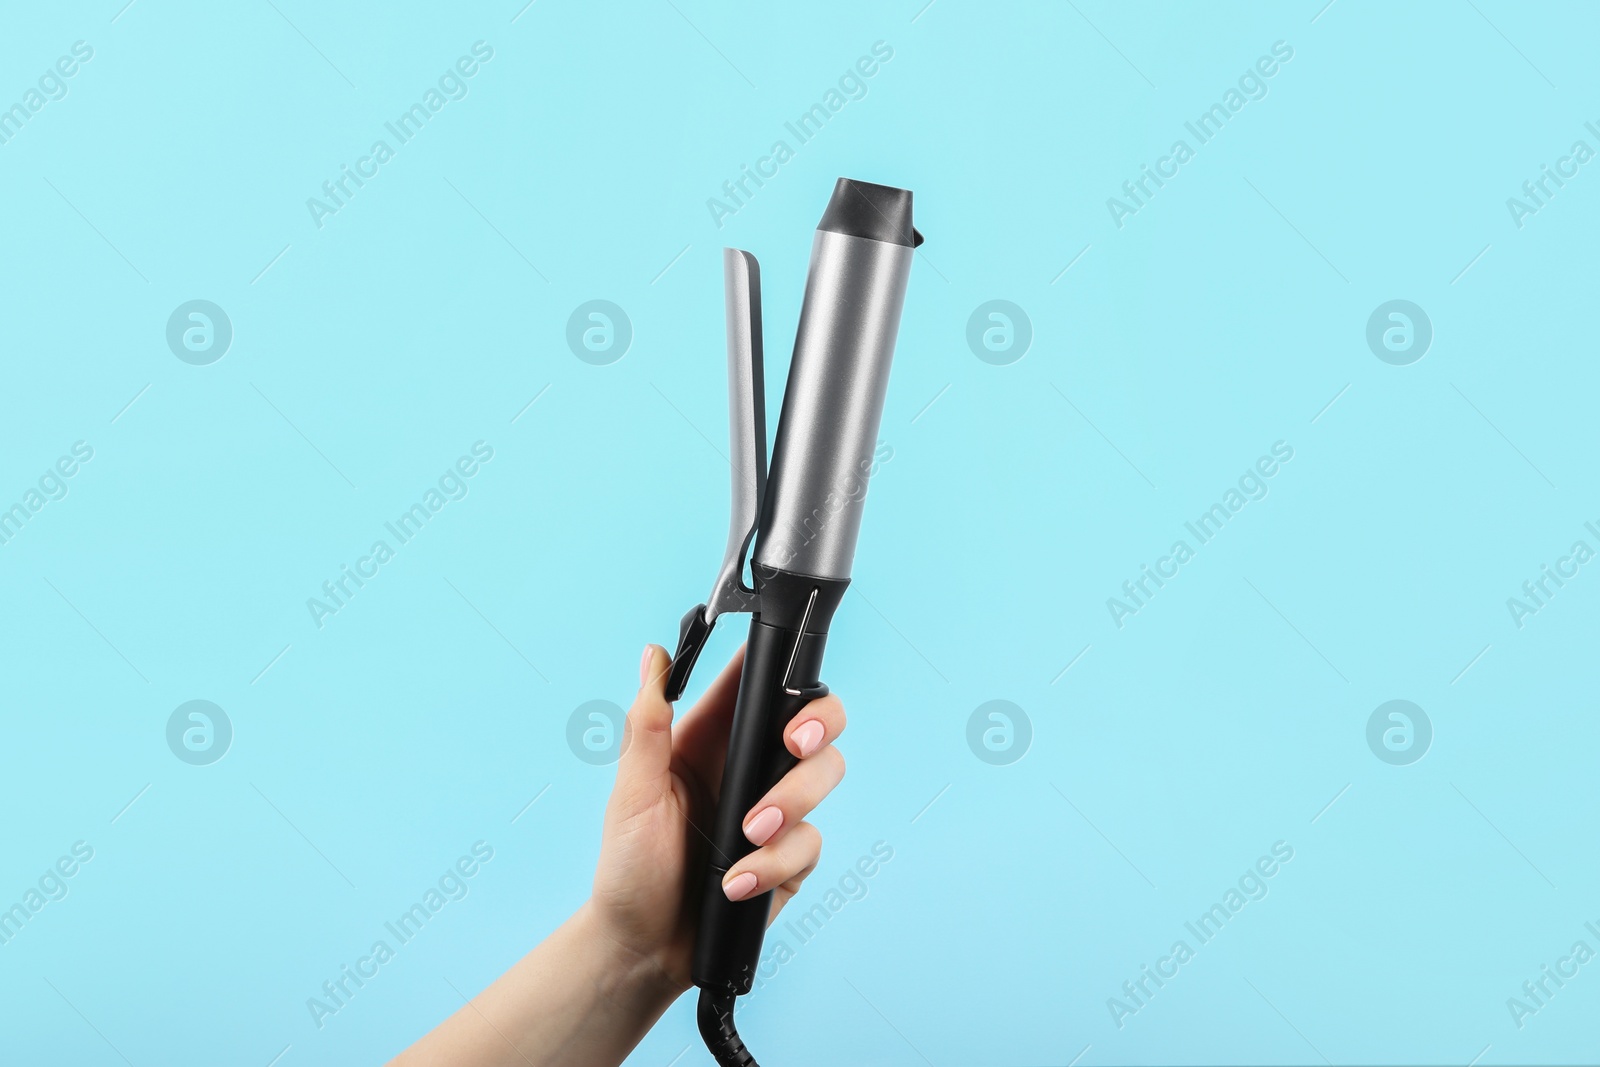 Photo of Hair styling appliance. Woman holding curling iron on light blue background, closeup